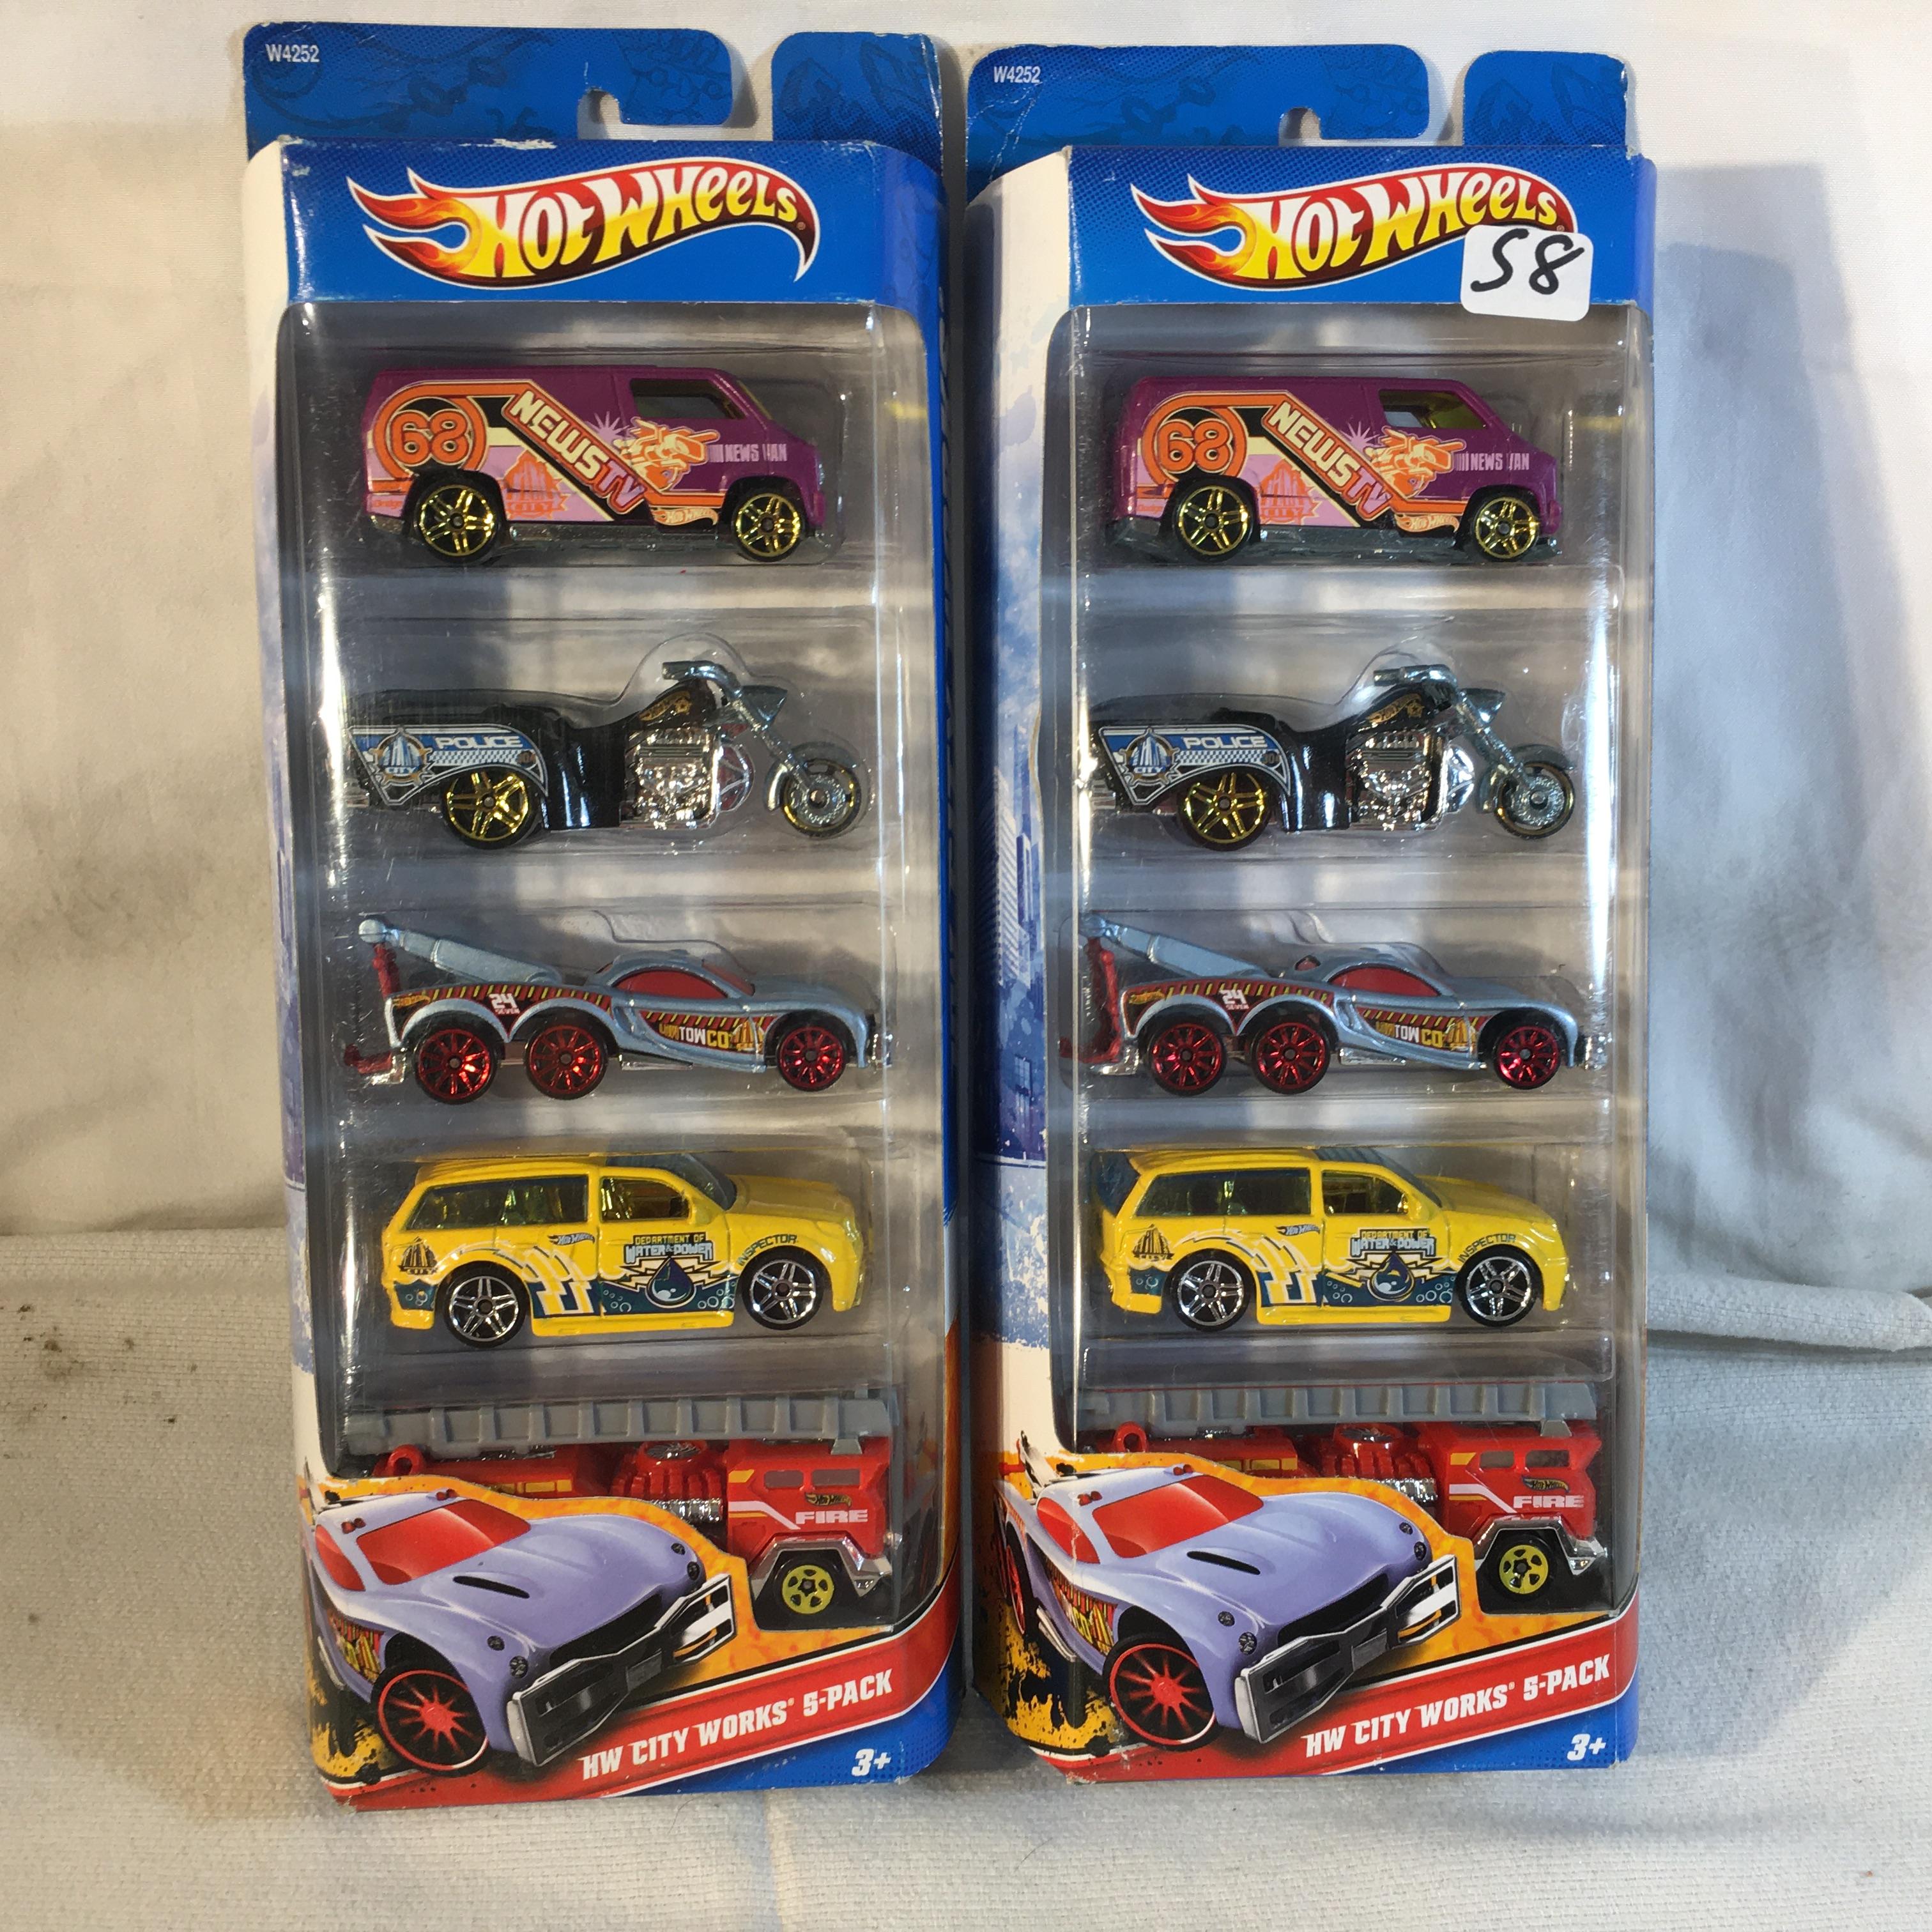 Lot of 2 Pcs 5-Pack Hot wheels 1/64 Scale DieCast Metal Cars - See Pictures